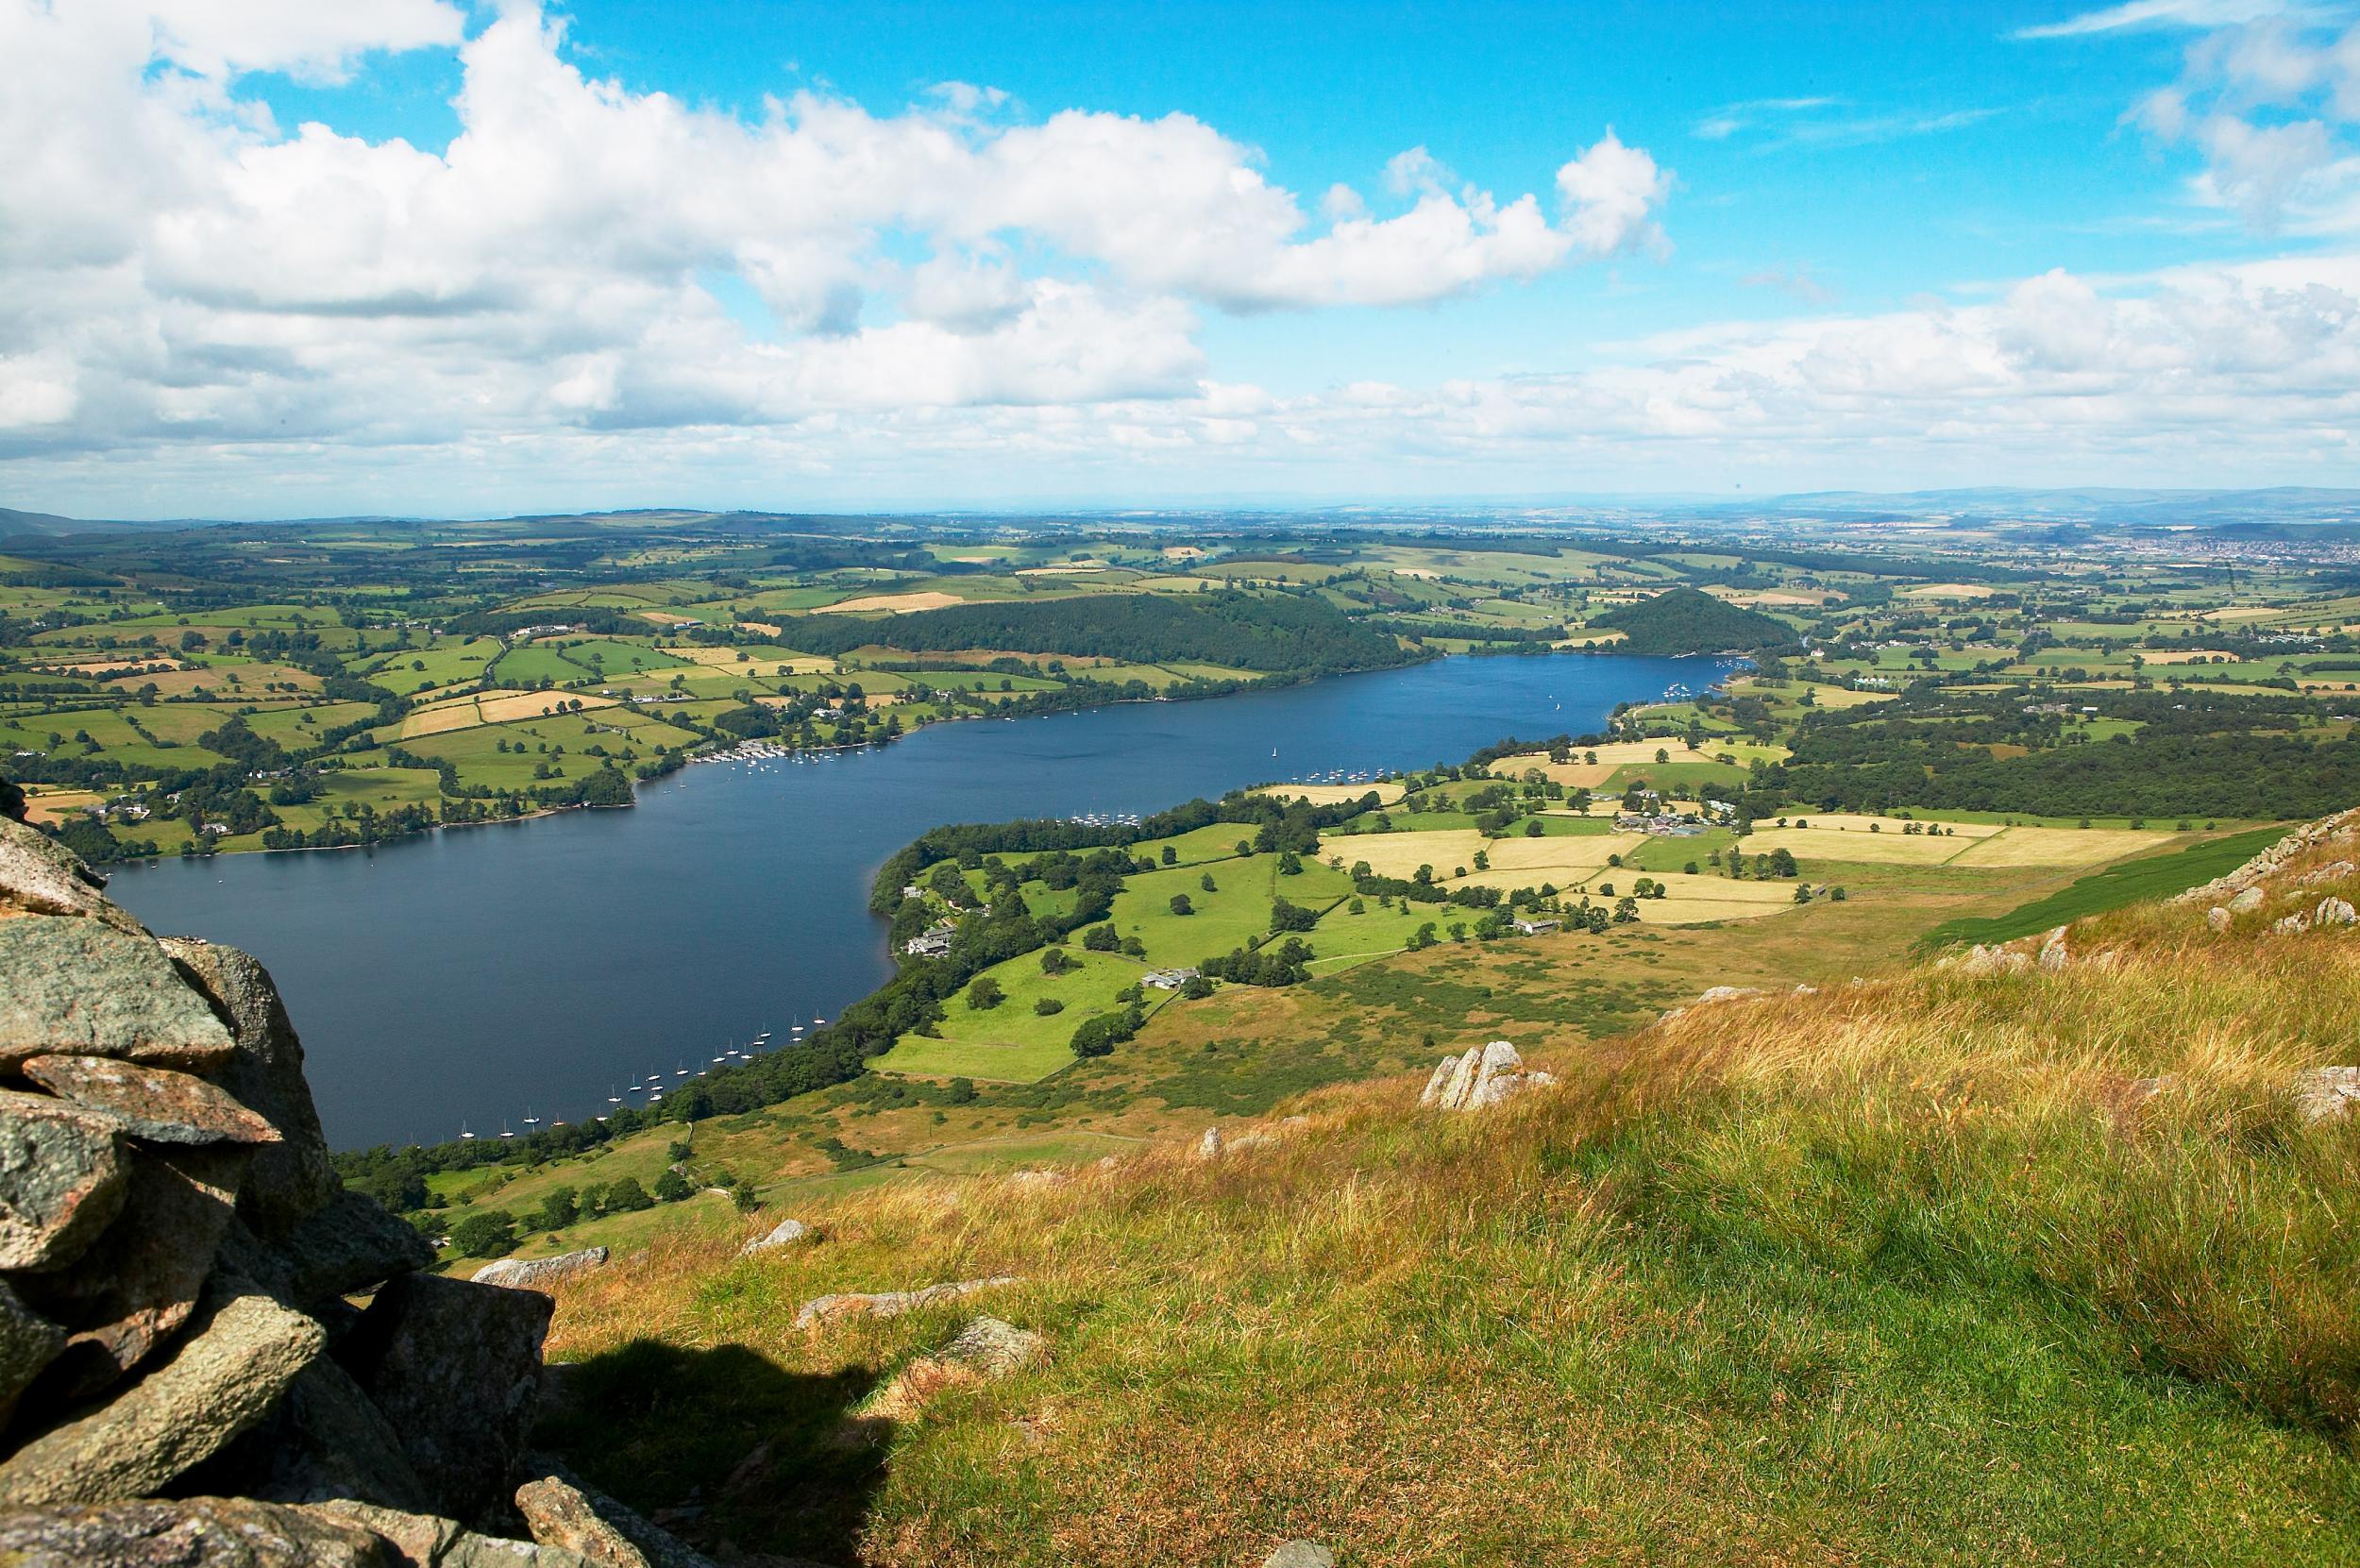 Beatrix Potter called the Lake District, including Ullswater, home